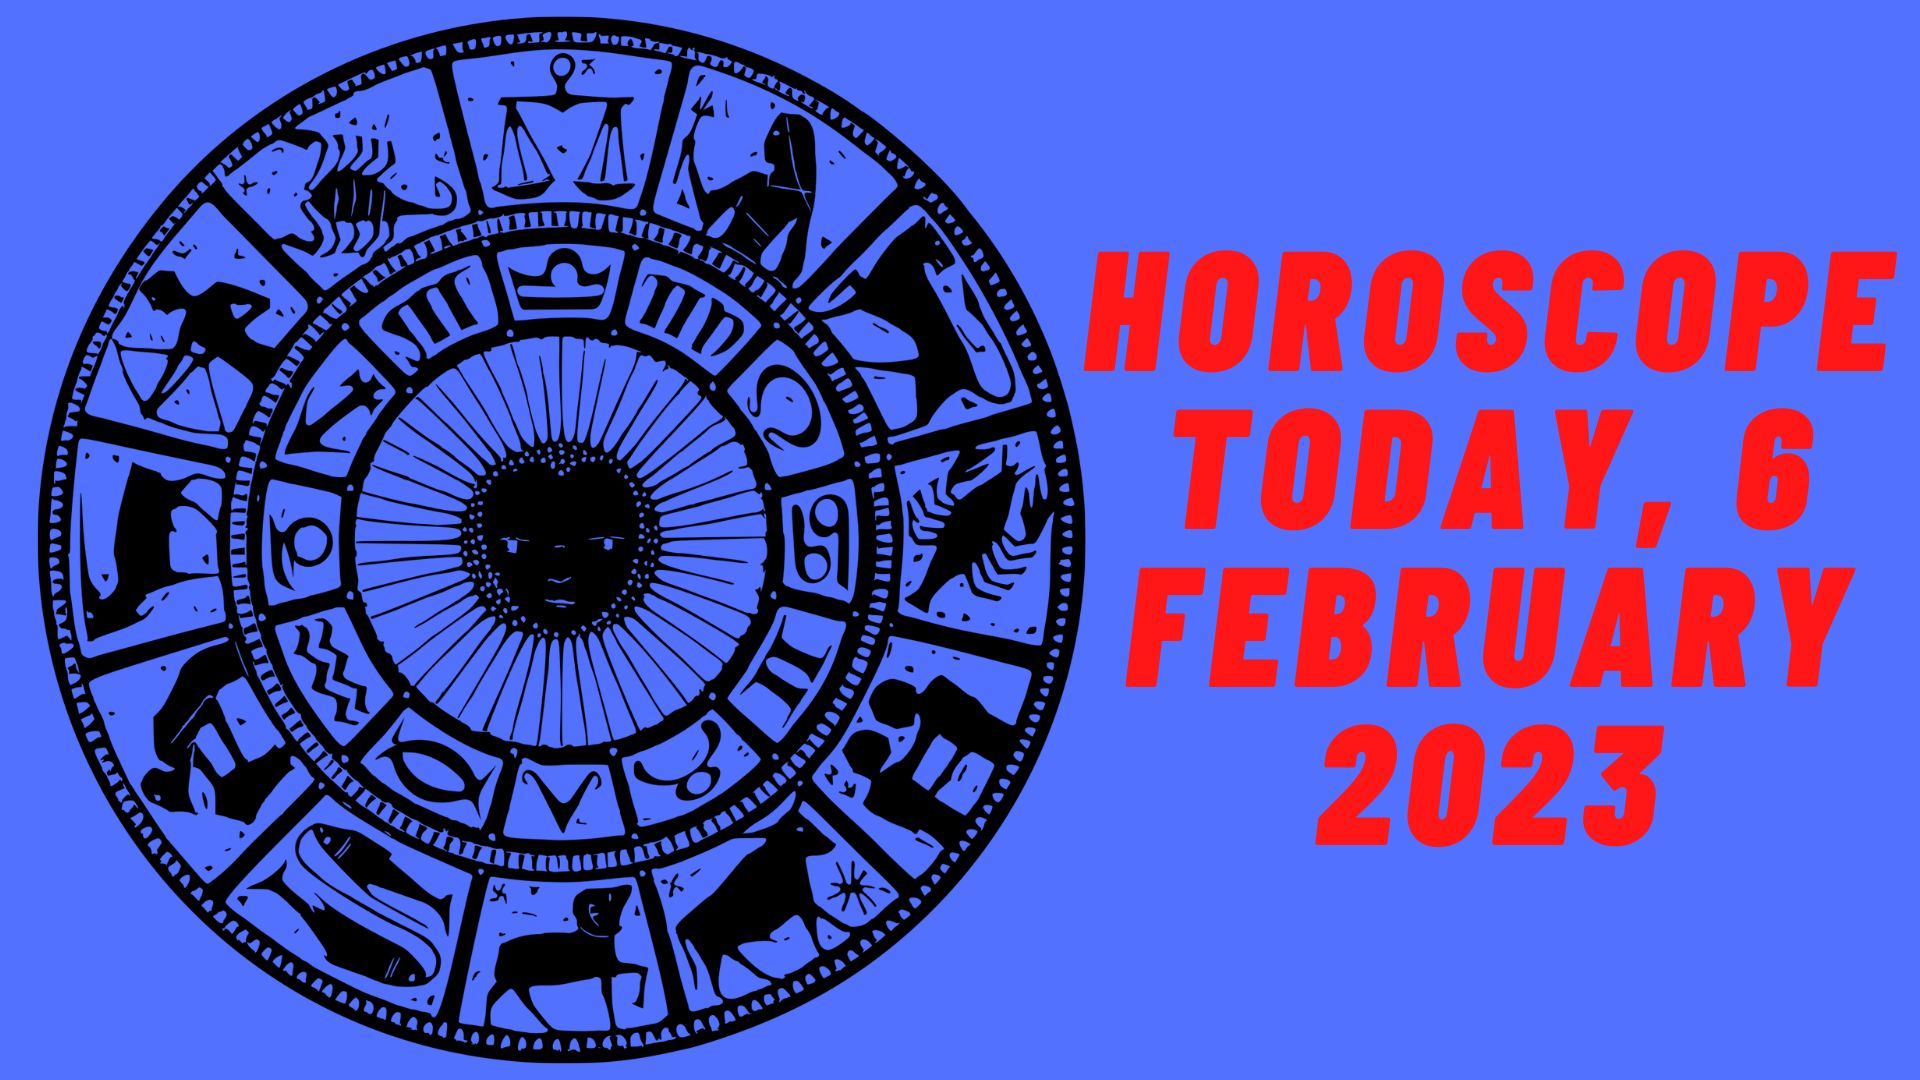 Horoscope Today, 6 February 2023 - Check Here Astrological Prediction For All Sun Signs